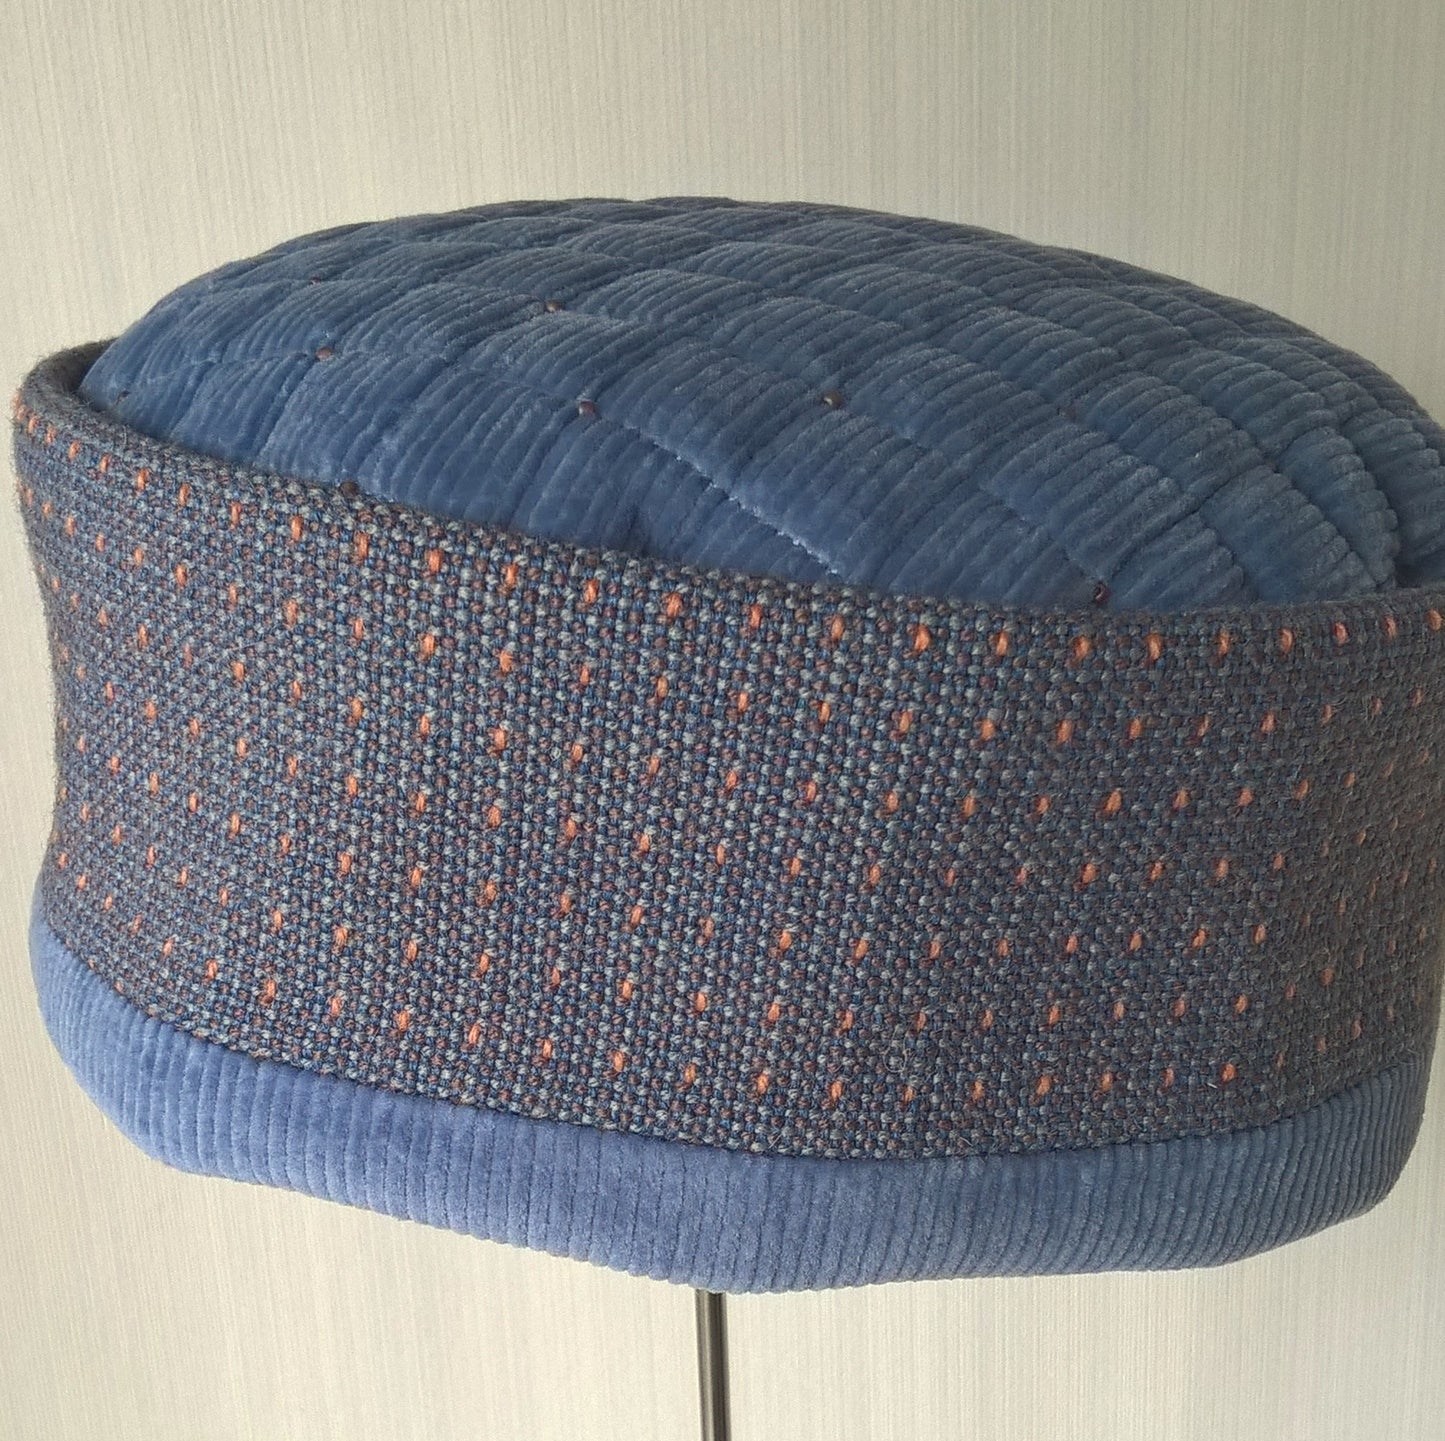 The blue corduroy hat has an ethnic crown with an orange tick pattern